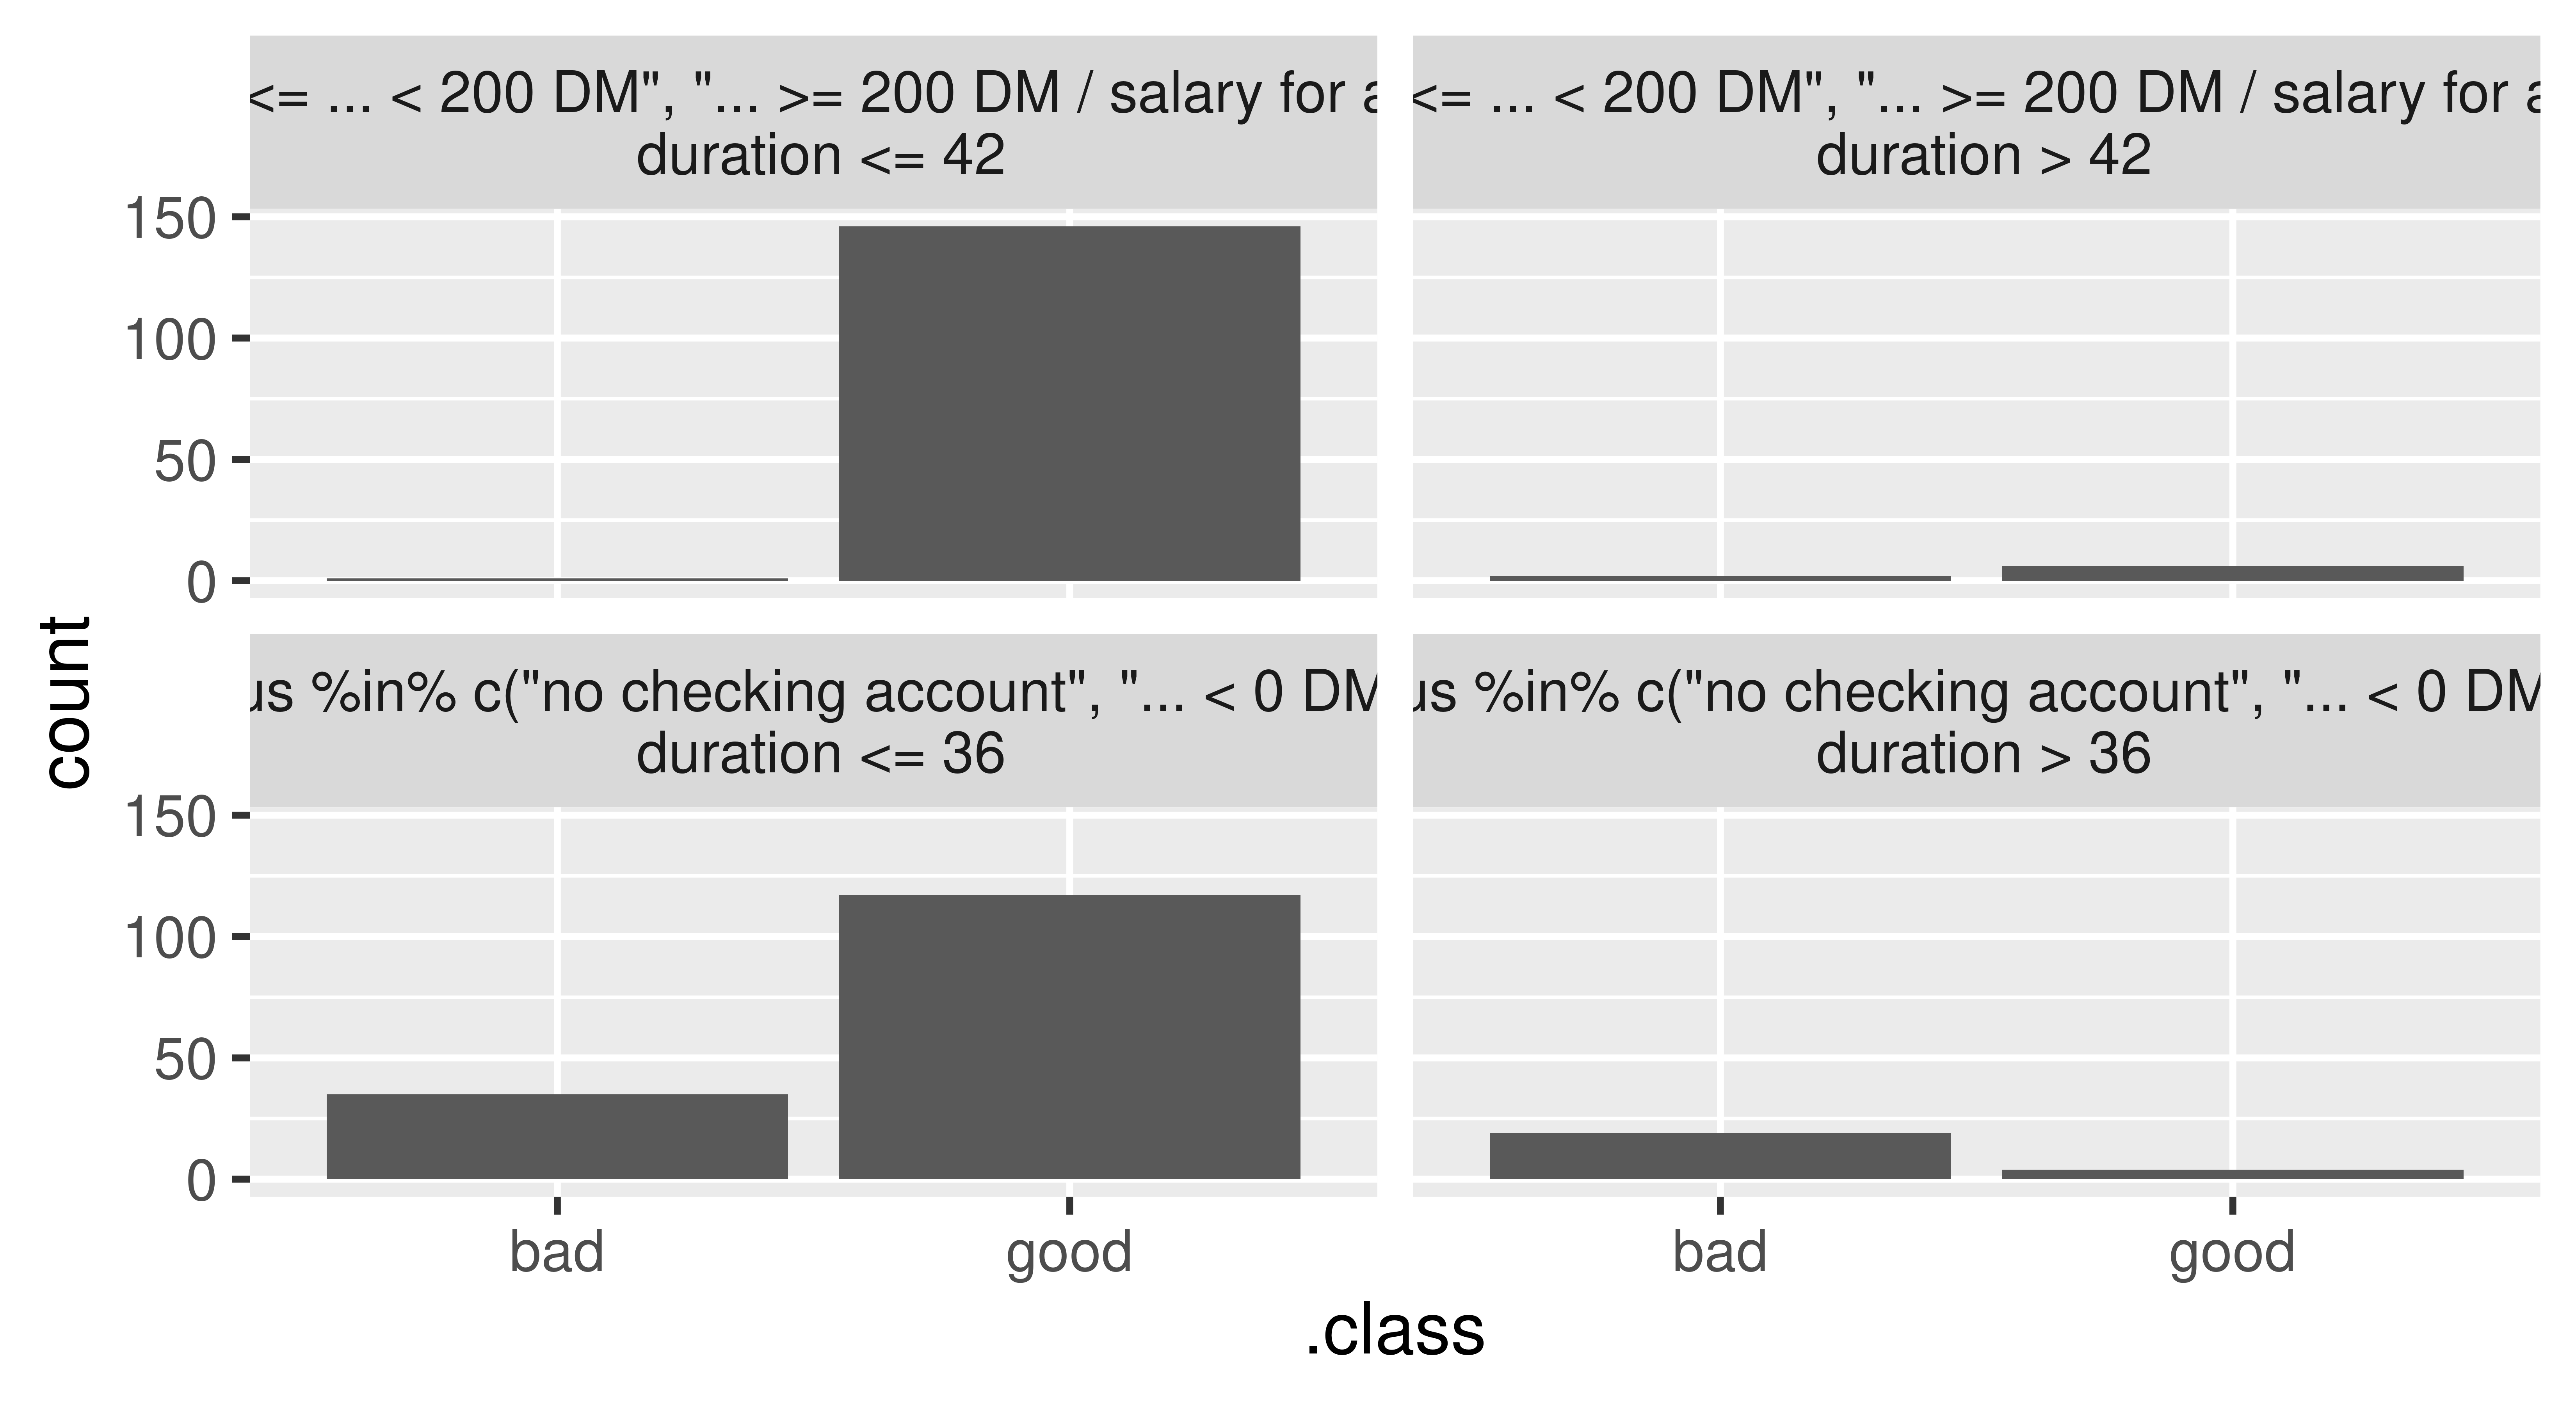 Four barplots with 'count' on the y-axis and '.class' on the x-axis. Top left shows 150 'good' credit predictions and around 1 'bad' prediction. Top right shows around 10 'good' predictions and 1 'bad' one. Bottom left shows around 120 'good' predictions and 40 'bad' ones. Bottom right shows about 23 'bad' predictions and around 5 'good' ones.